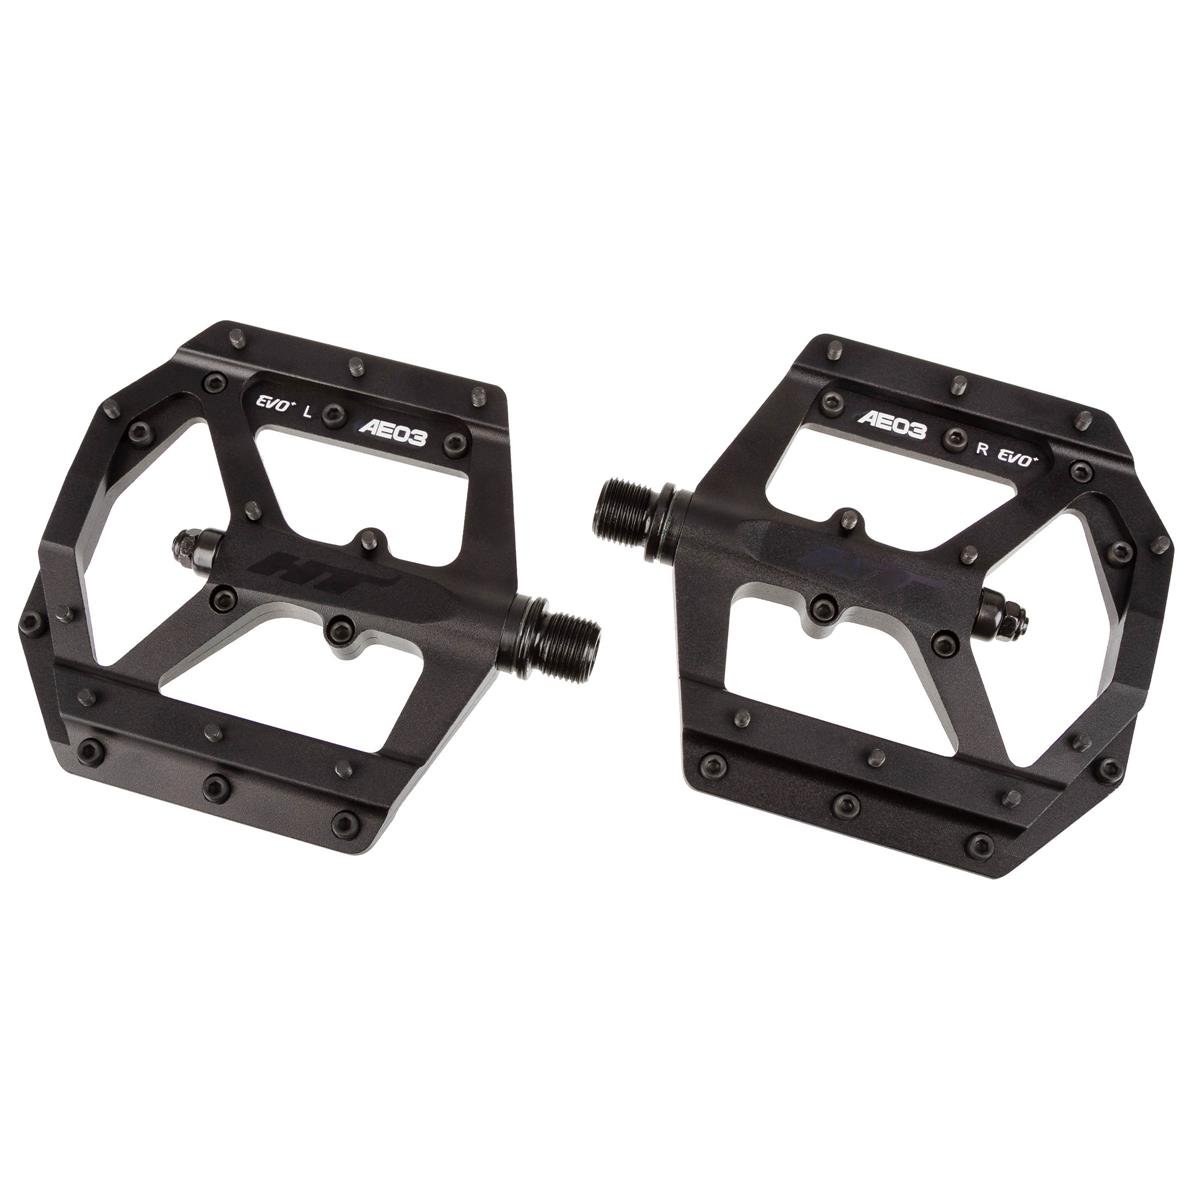 HT Components Pedals AE03 Stealth Black